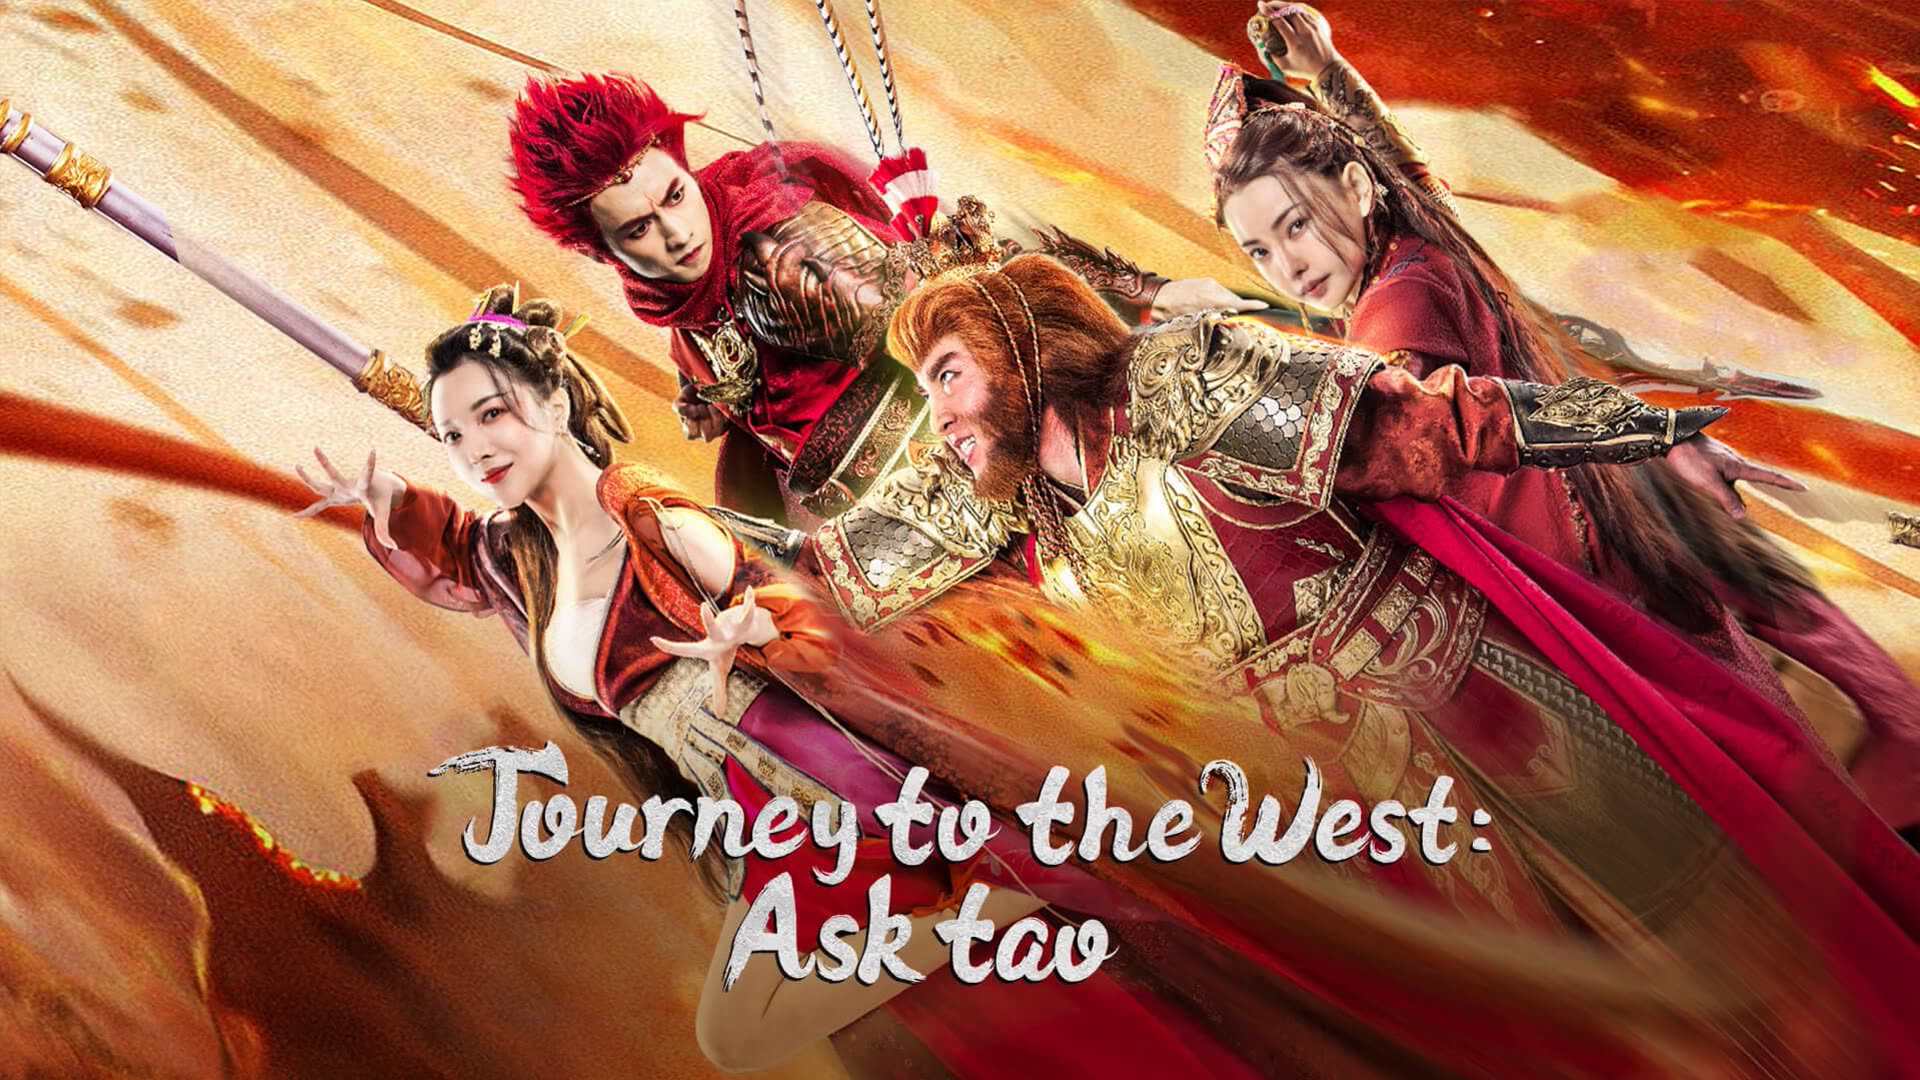 Banner Phim Tây Du Vấn Đạo (Journey to the West: Ask tao)